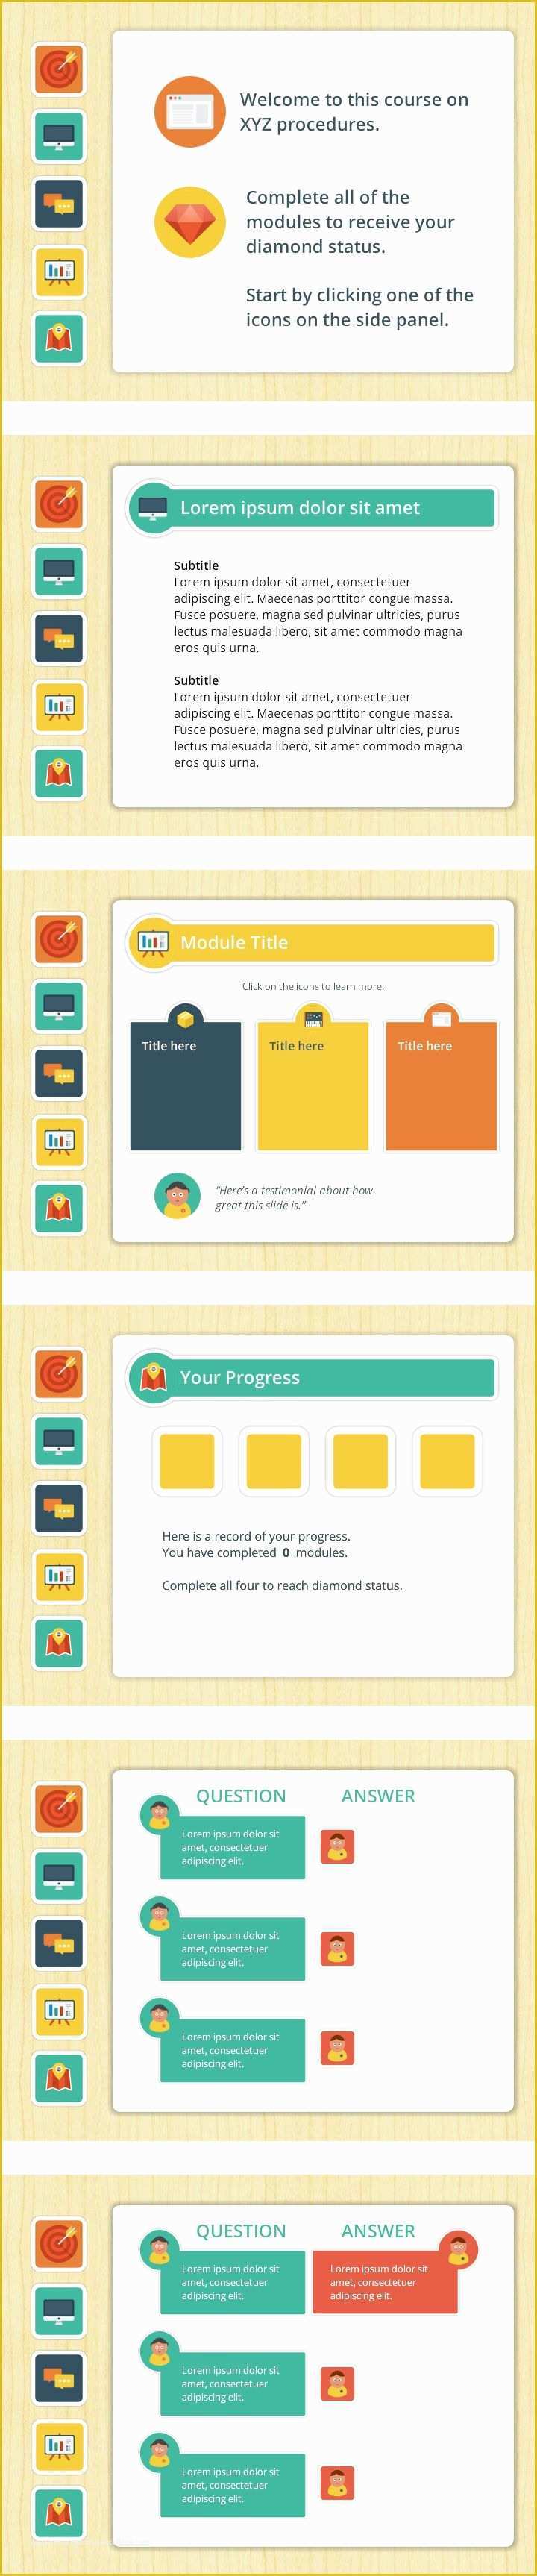 Articulate Storyline Templates Free Download Of 229 Best Images About Elearning Templates On Pinterest